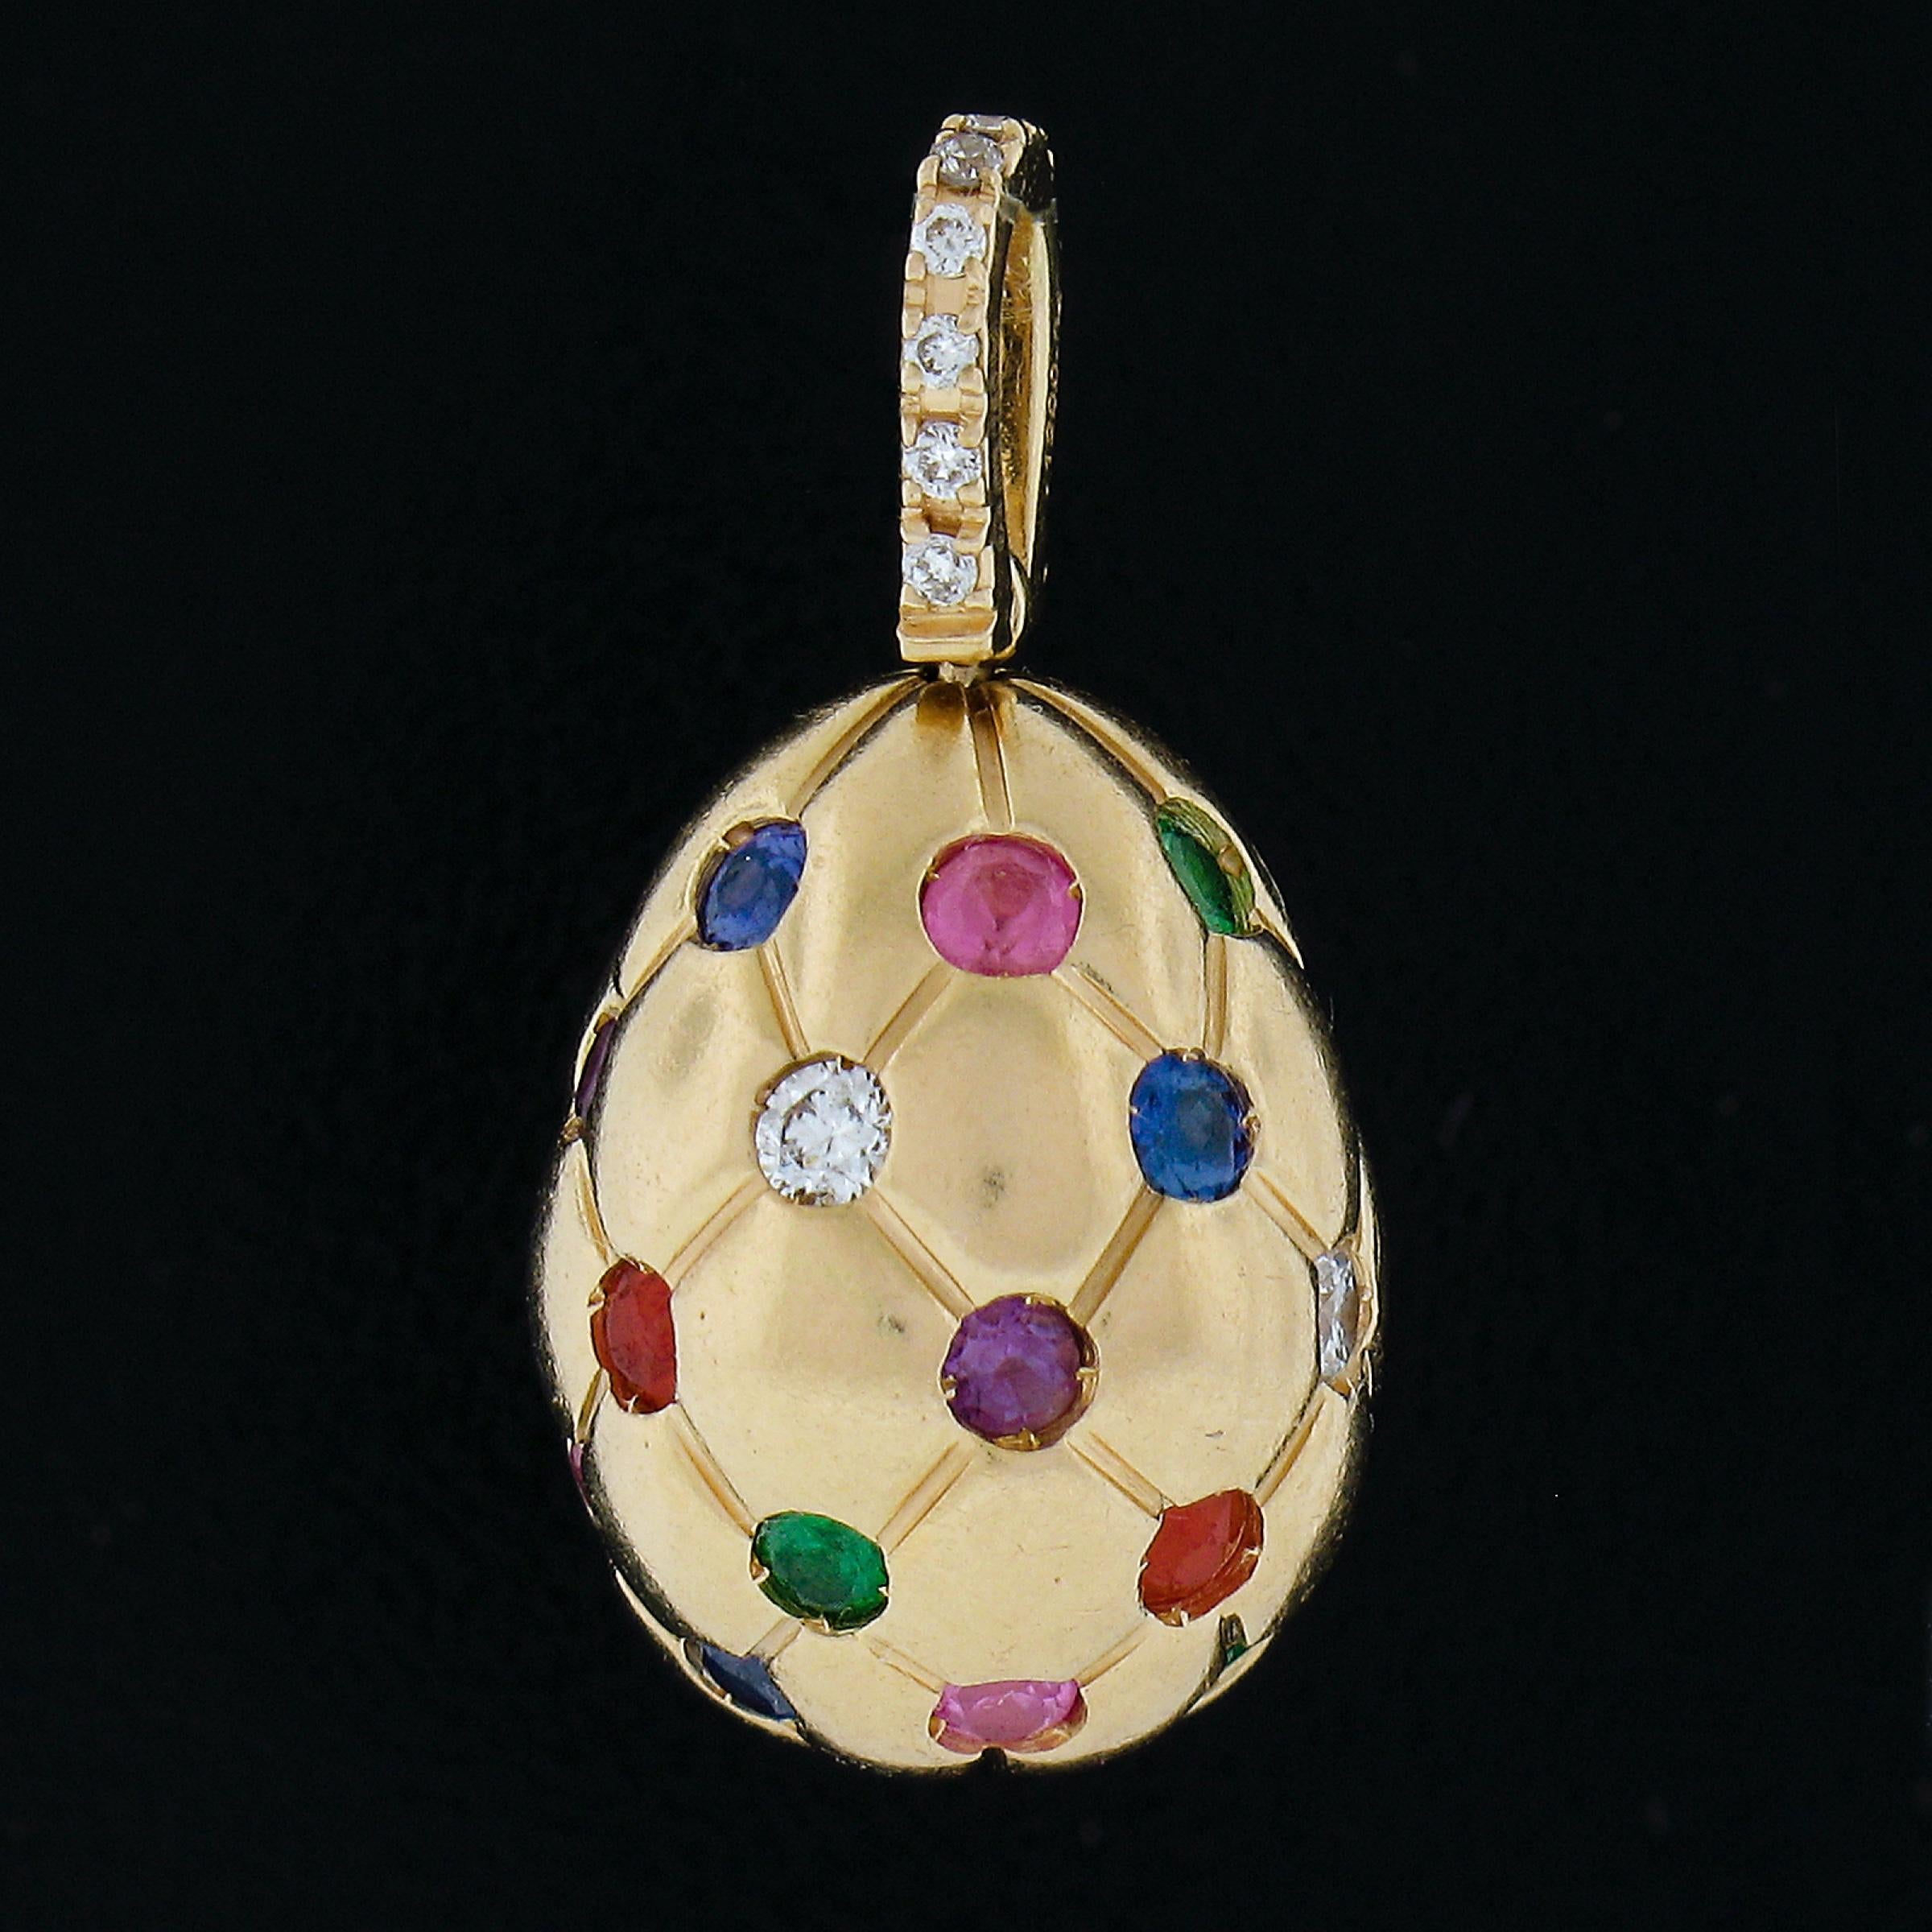 Here we have an adorable egg charm by Faberge features 18k brushed rose gold and encrusted with multi colored gemstones and diamonds pave set in a quilting pattern throughout. Signed properly and remains in excellent overall physical condition. An